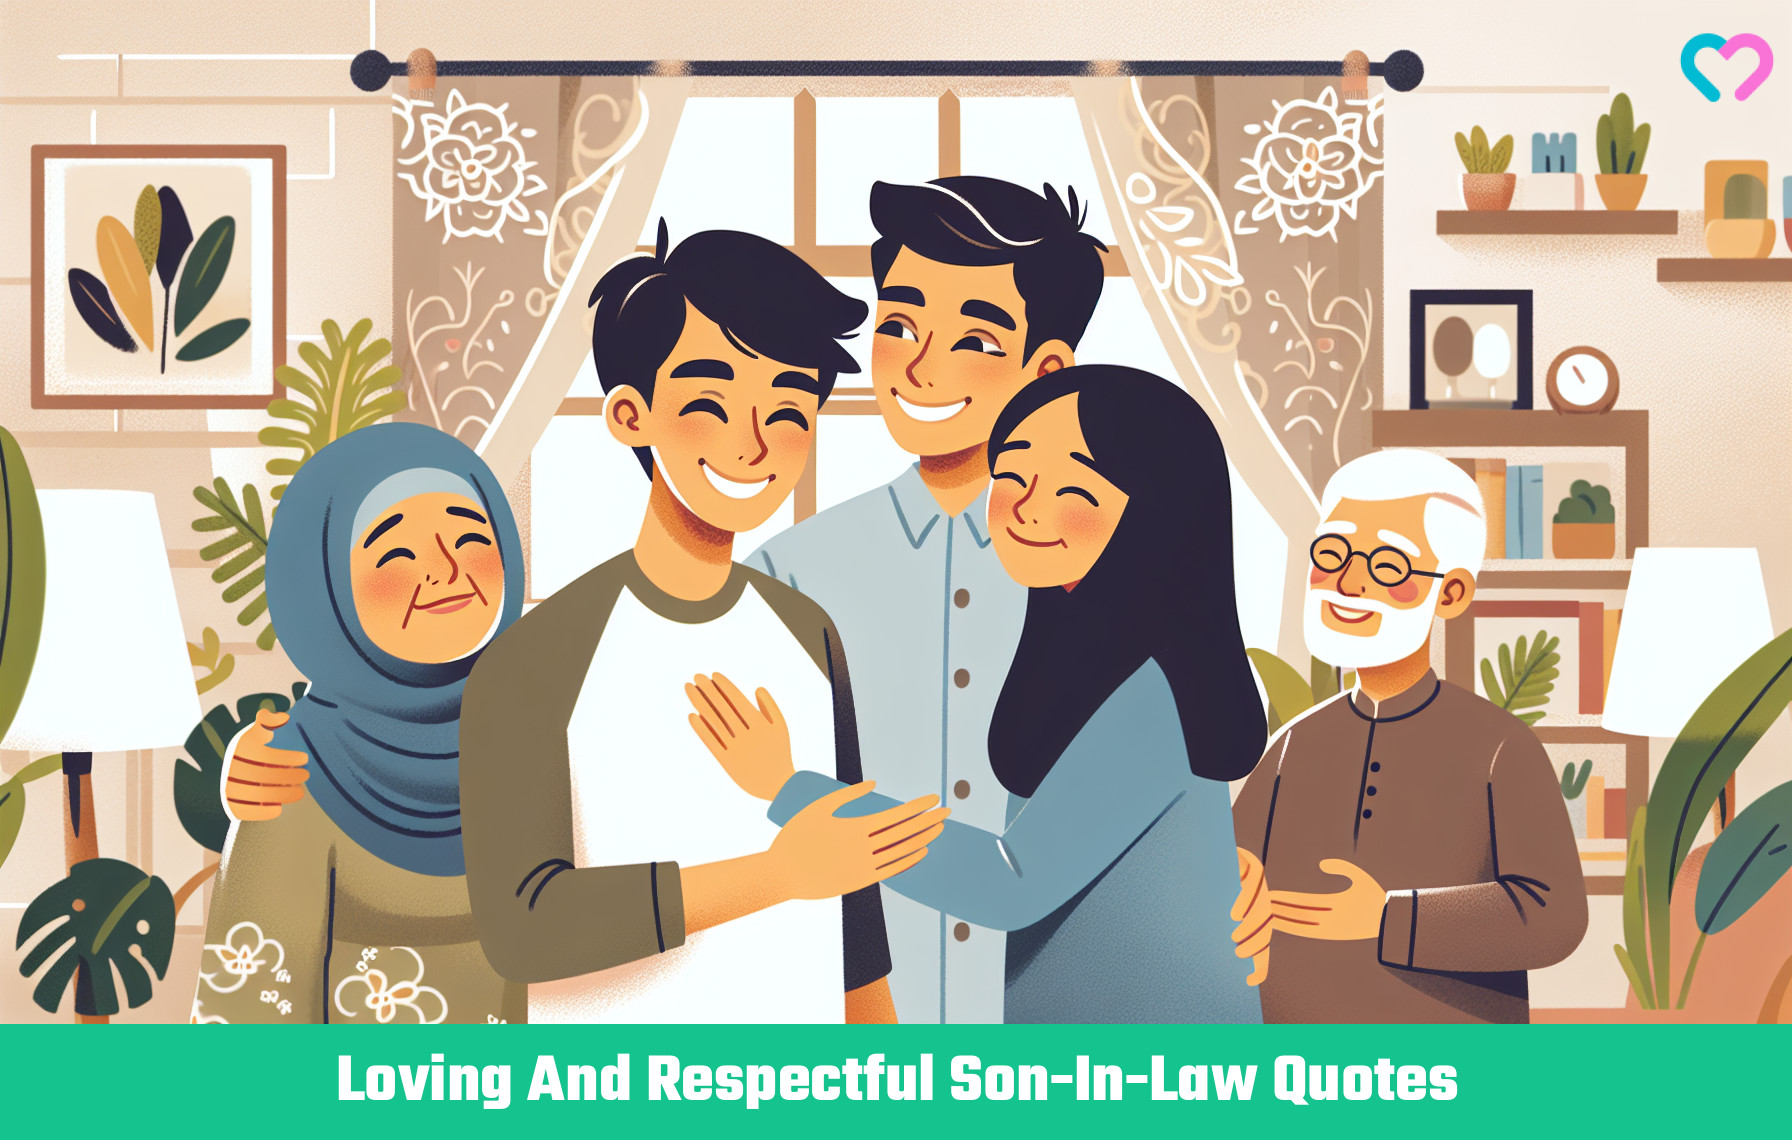 Son-In-Law Quotes_illustration